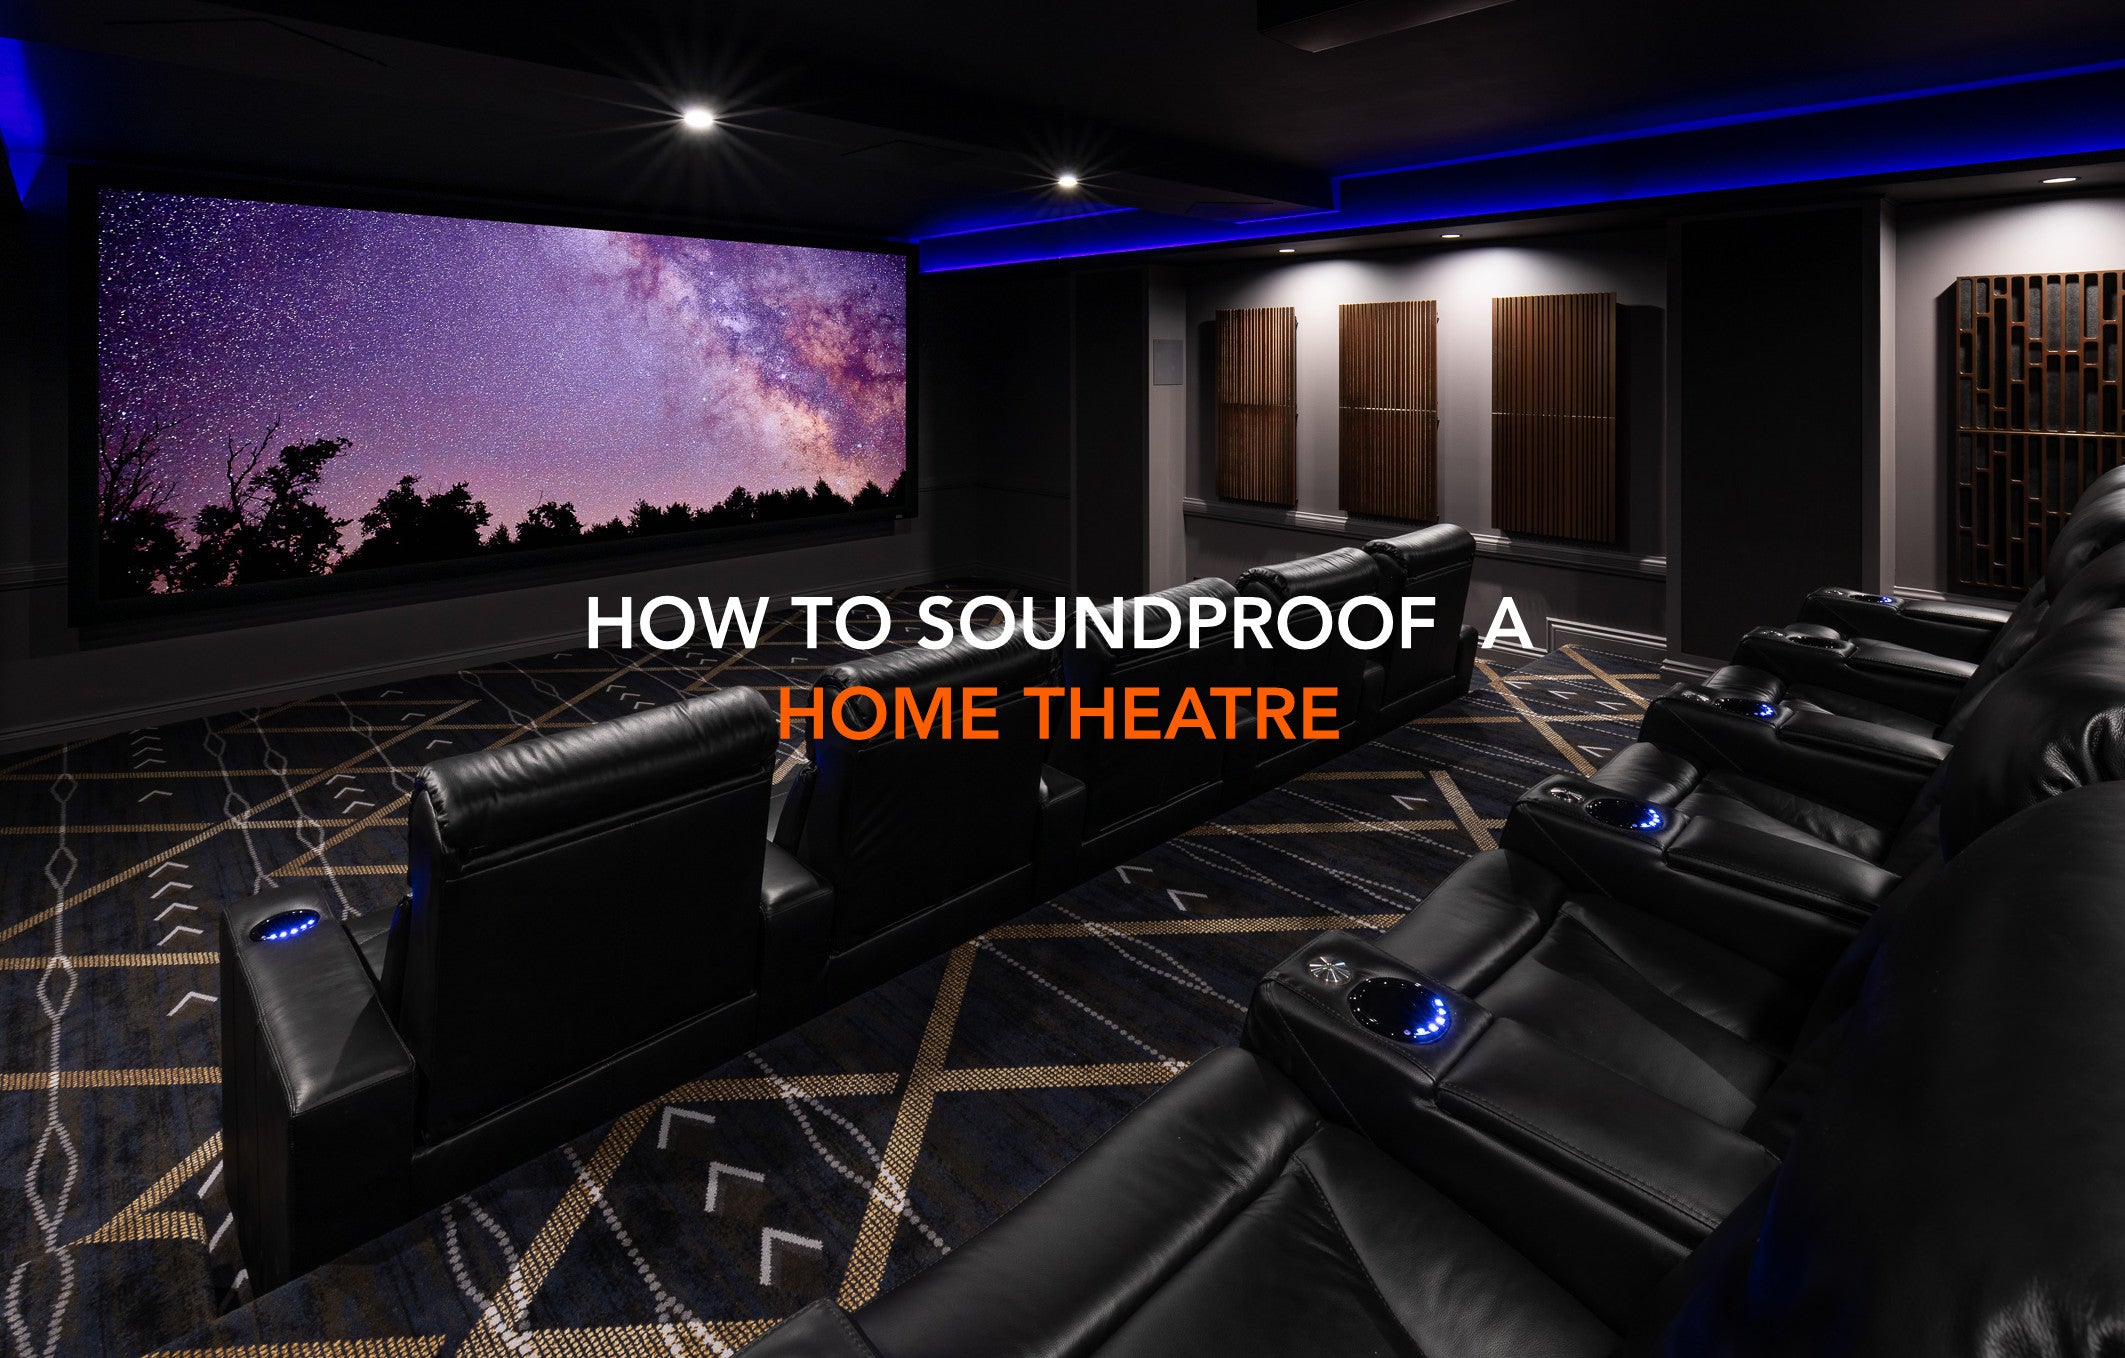 How to Soundproof a Home Theatre